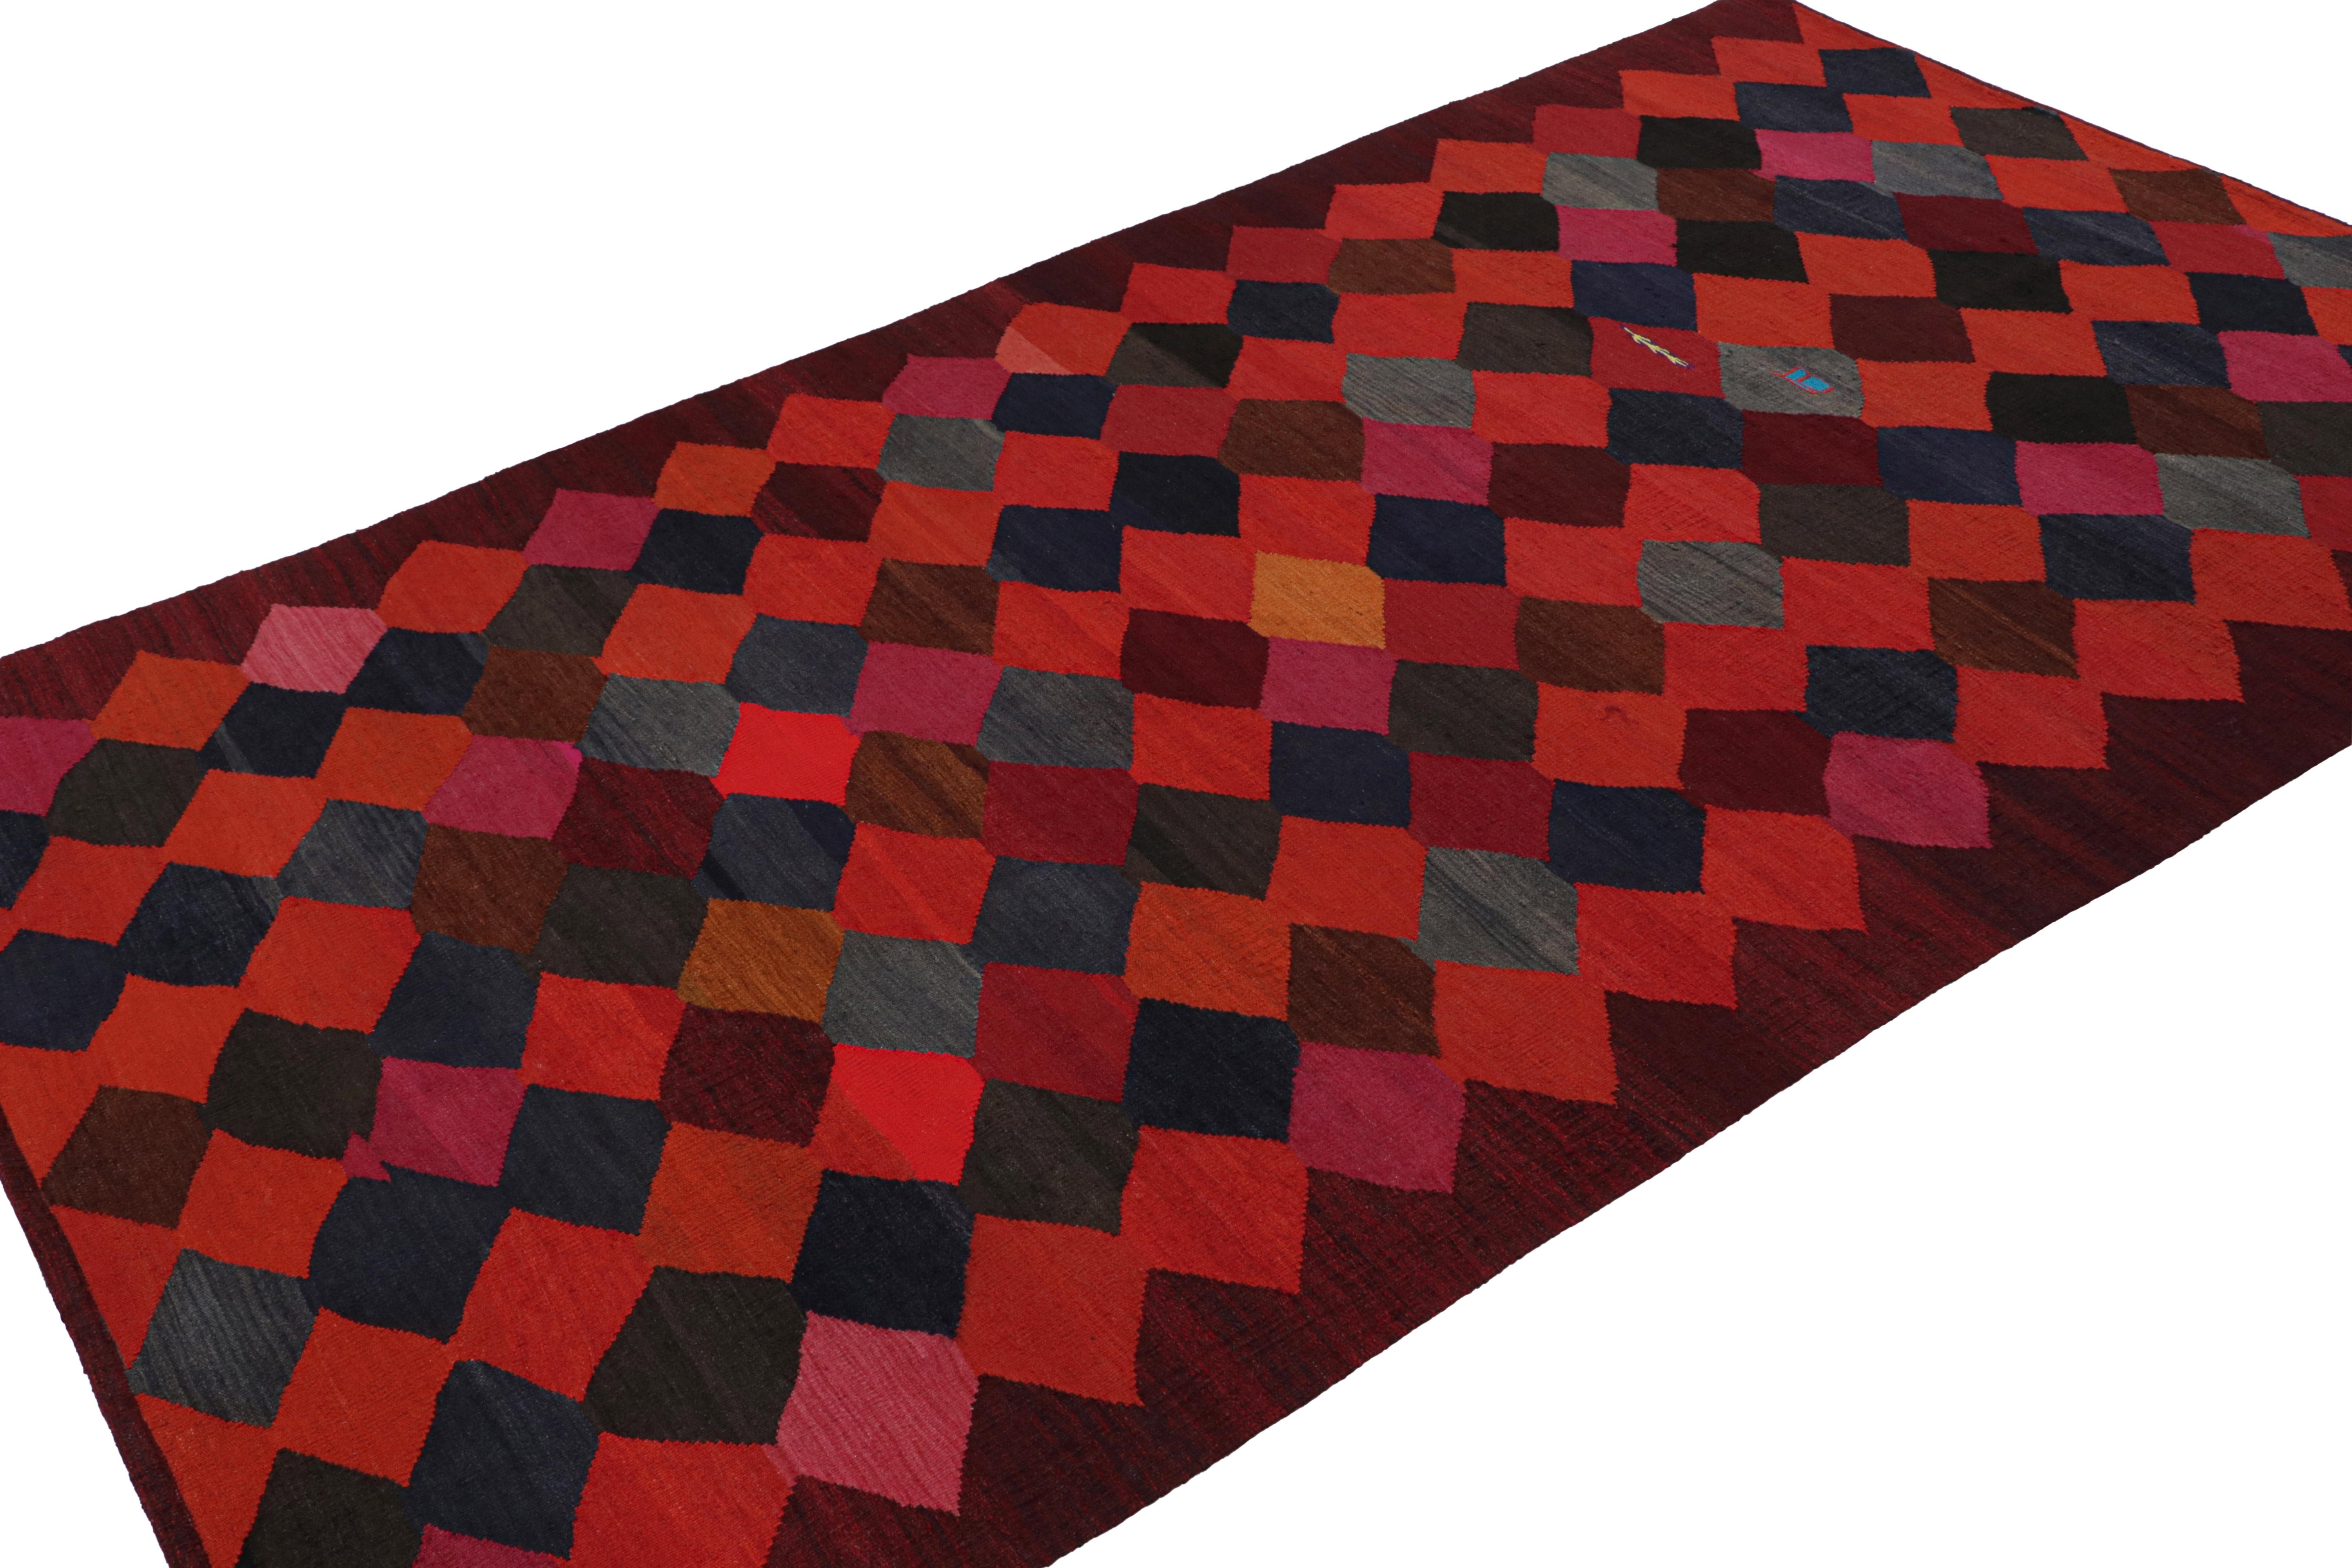 This vintage 6x10 Persian Kilim is a mid-century tribal rug - latest to join our Kilim & Flatweave collection. 

On the Design:

Handwoven in wool circa 1950-1960, the rare piece enjoys stripes in bright colors. This is a playful piece with a